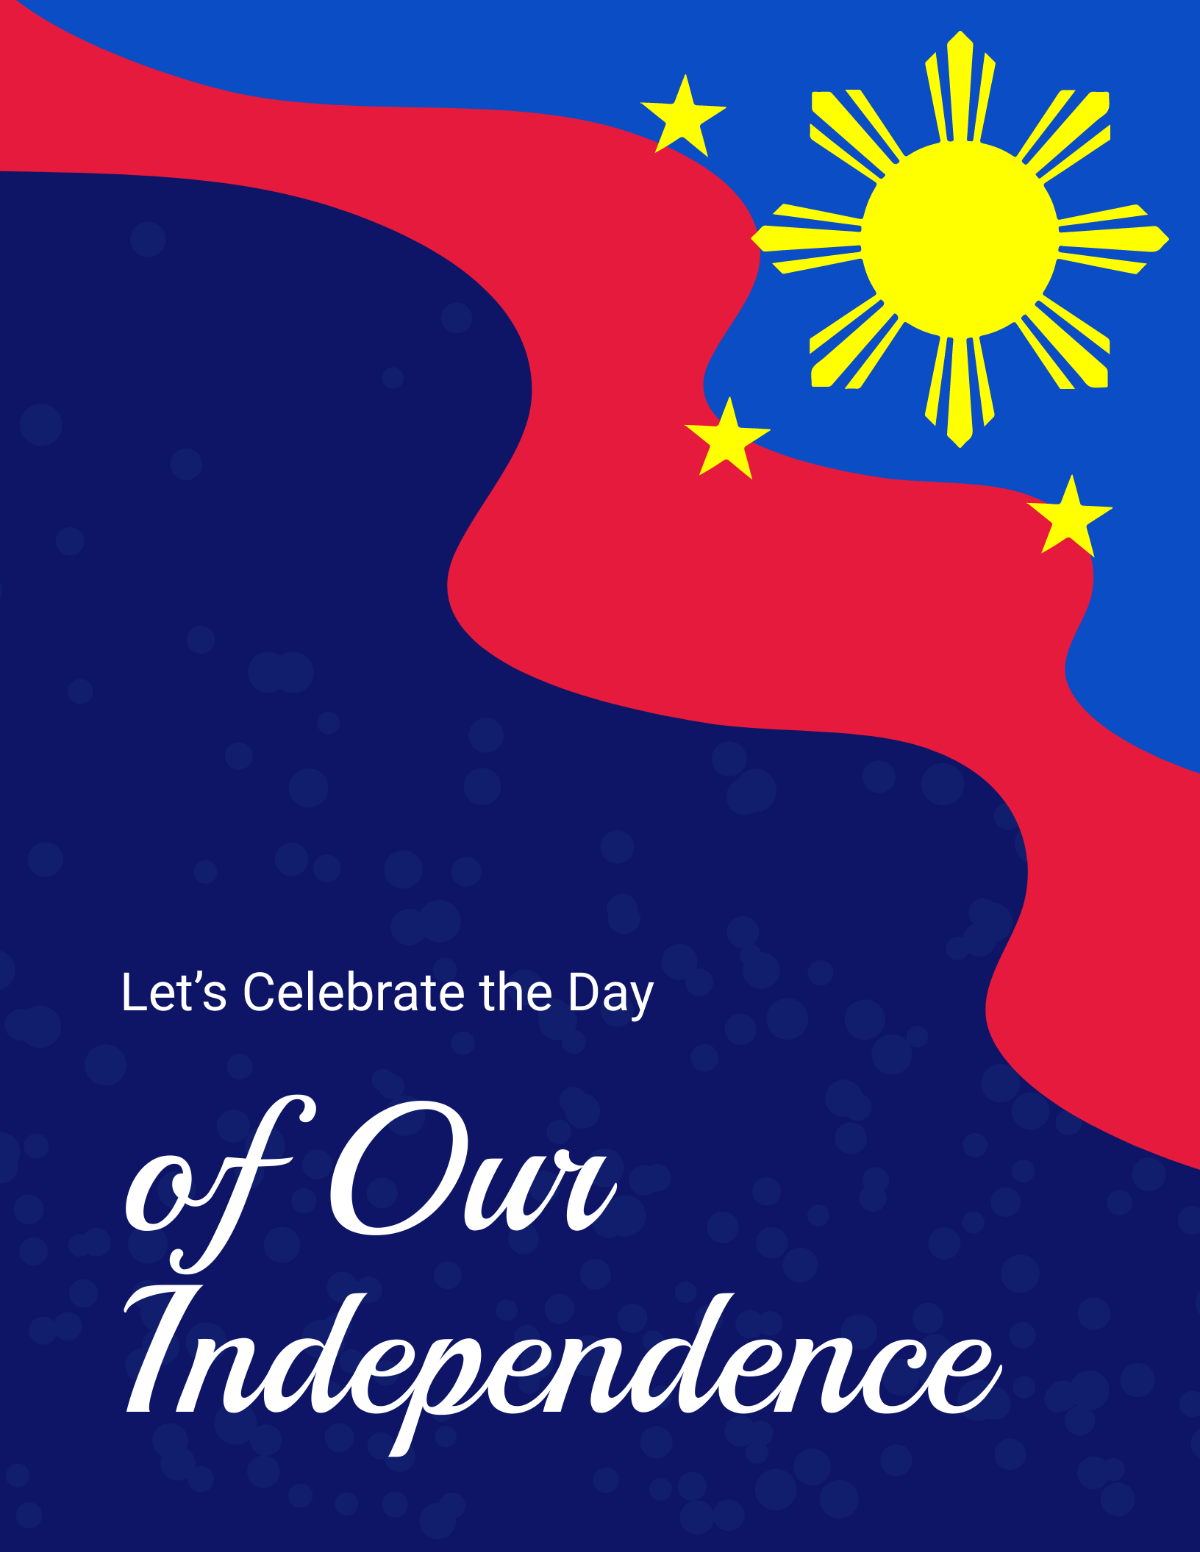 Philippines Independence Day Celebration Flyer